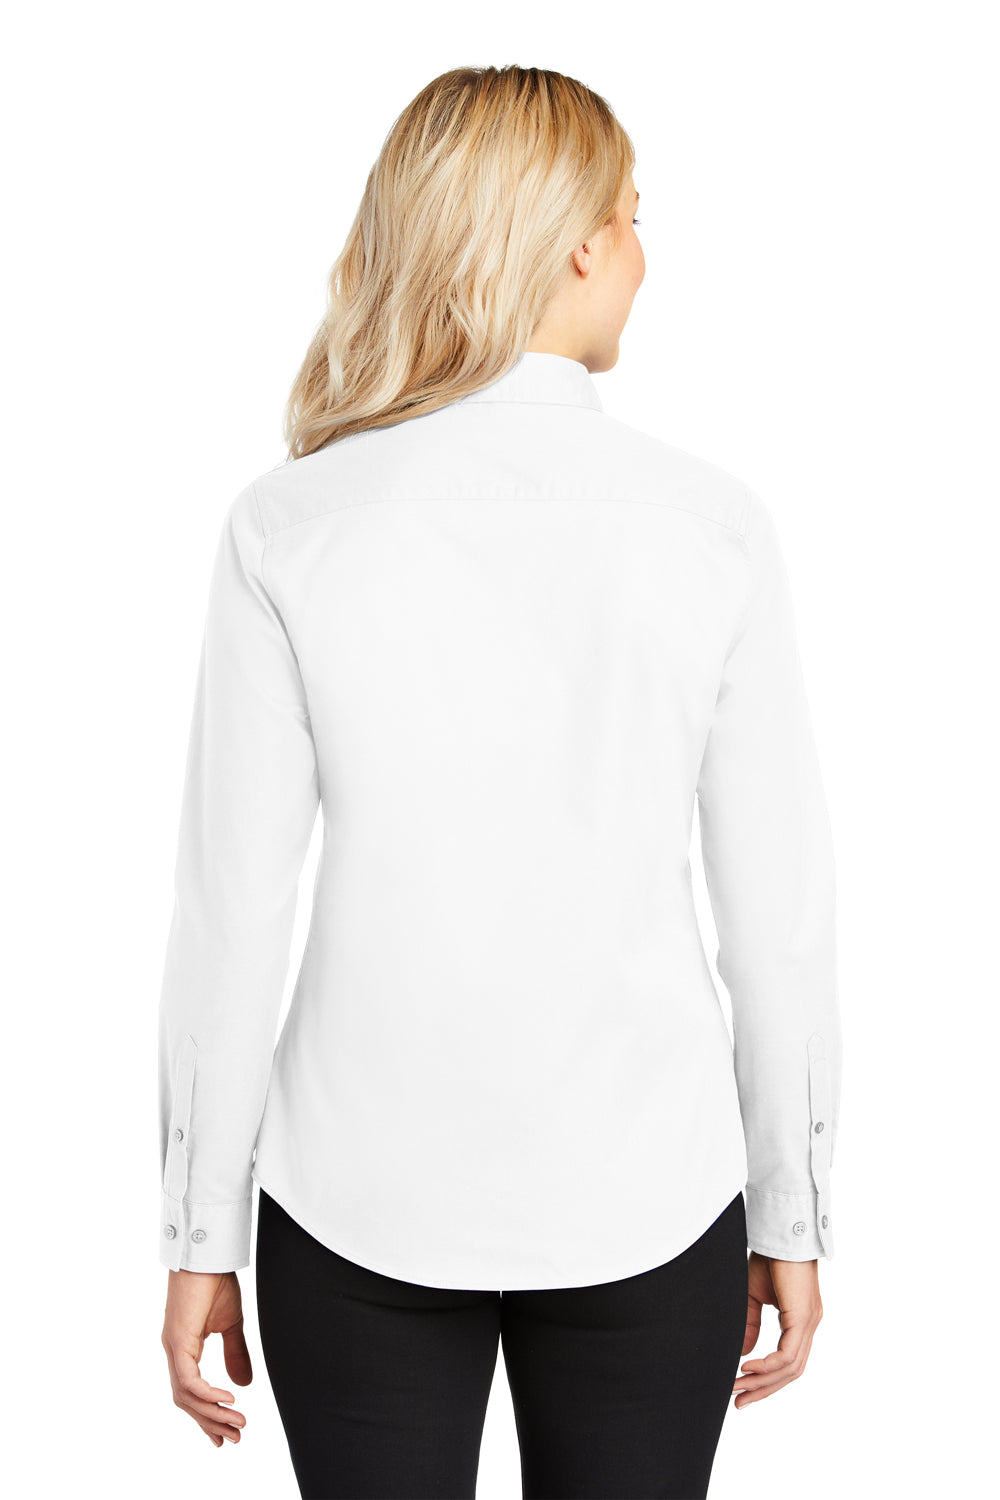 Port Authority L608 Womens Easy Care Wrinkle Resistant Long Sleeve Button Down Shirt White Back